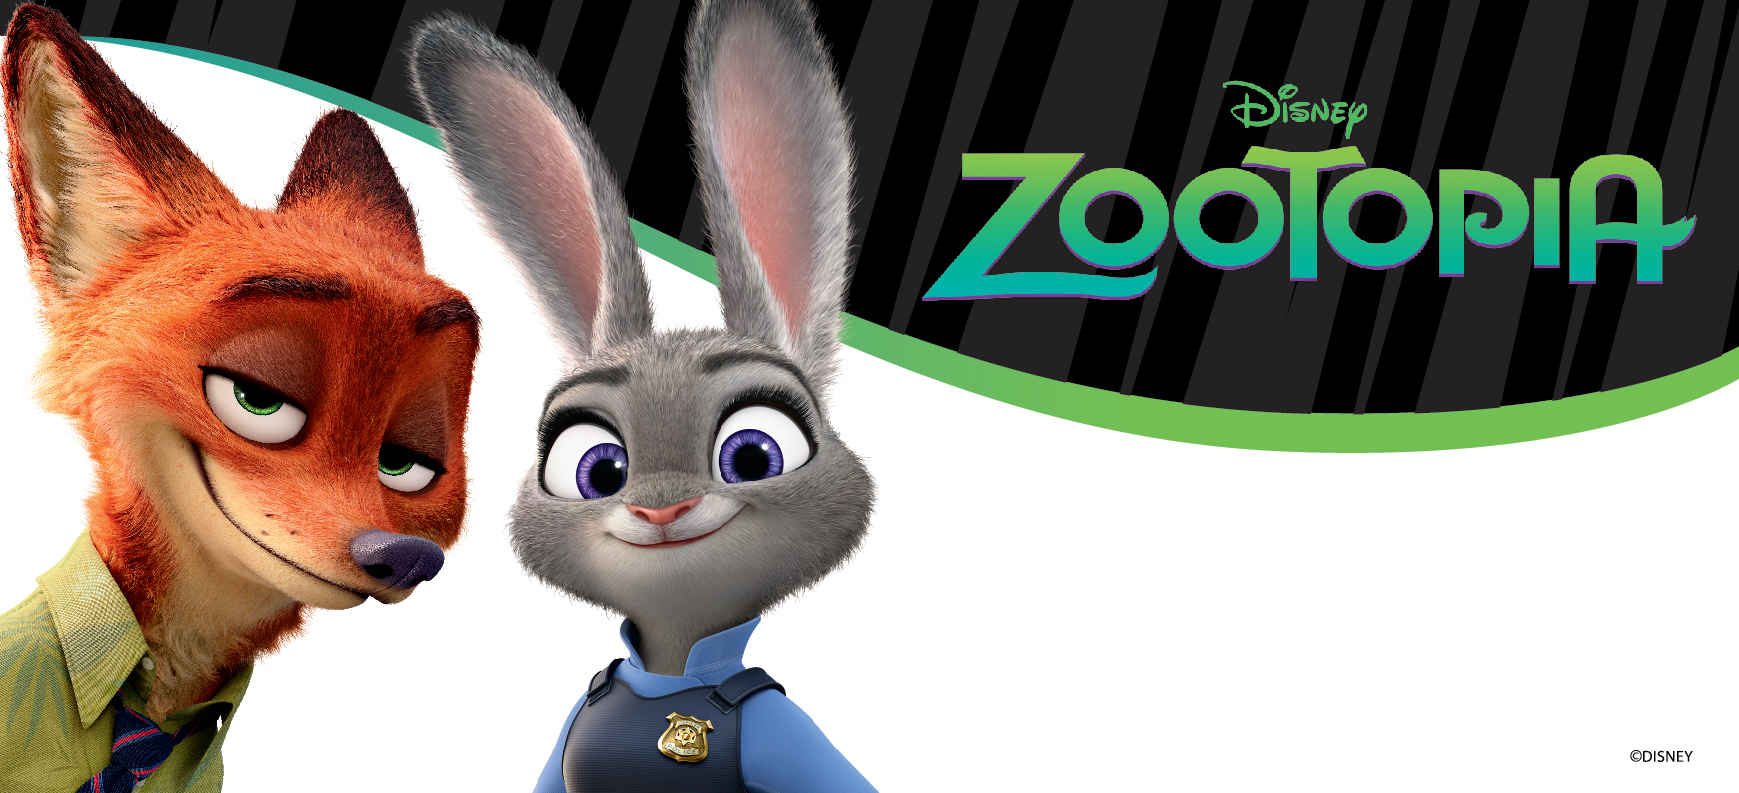 Put A Hop in Your Step with Disney's Zootopia: A Review ⋆